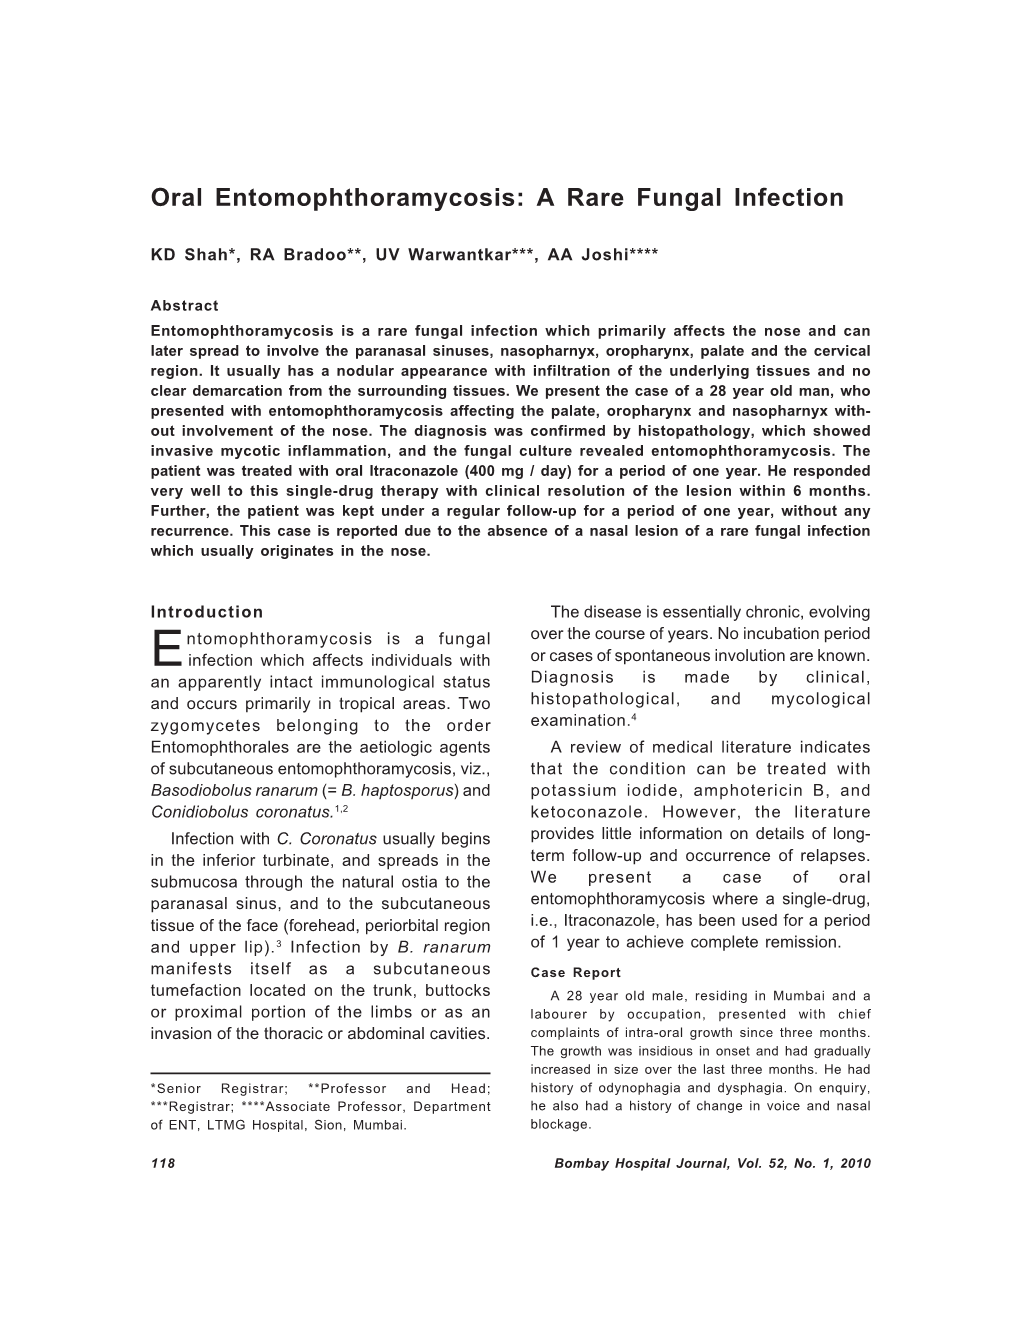 Oral Entomophthoramycosis: a Rare Fungal Infection